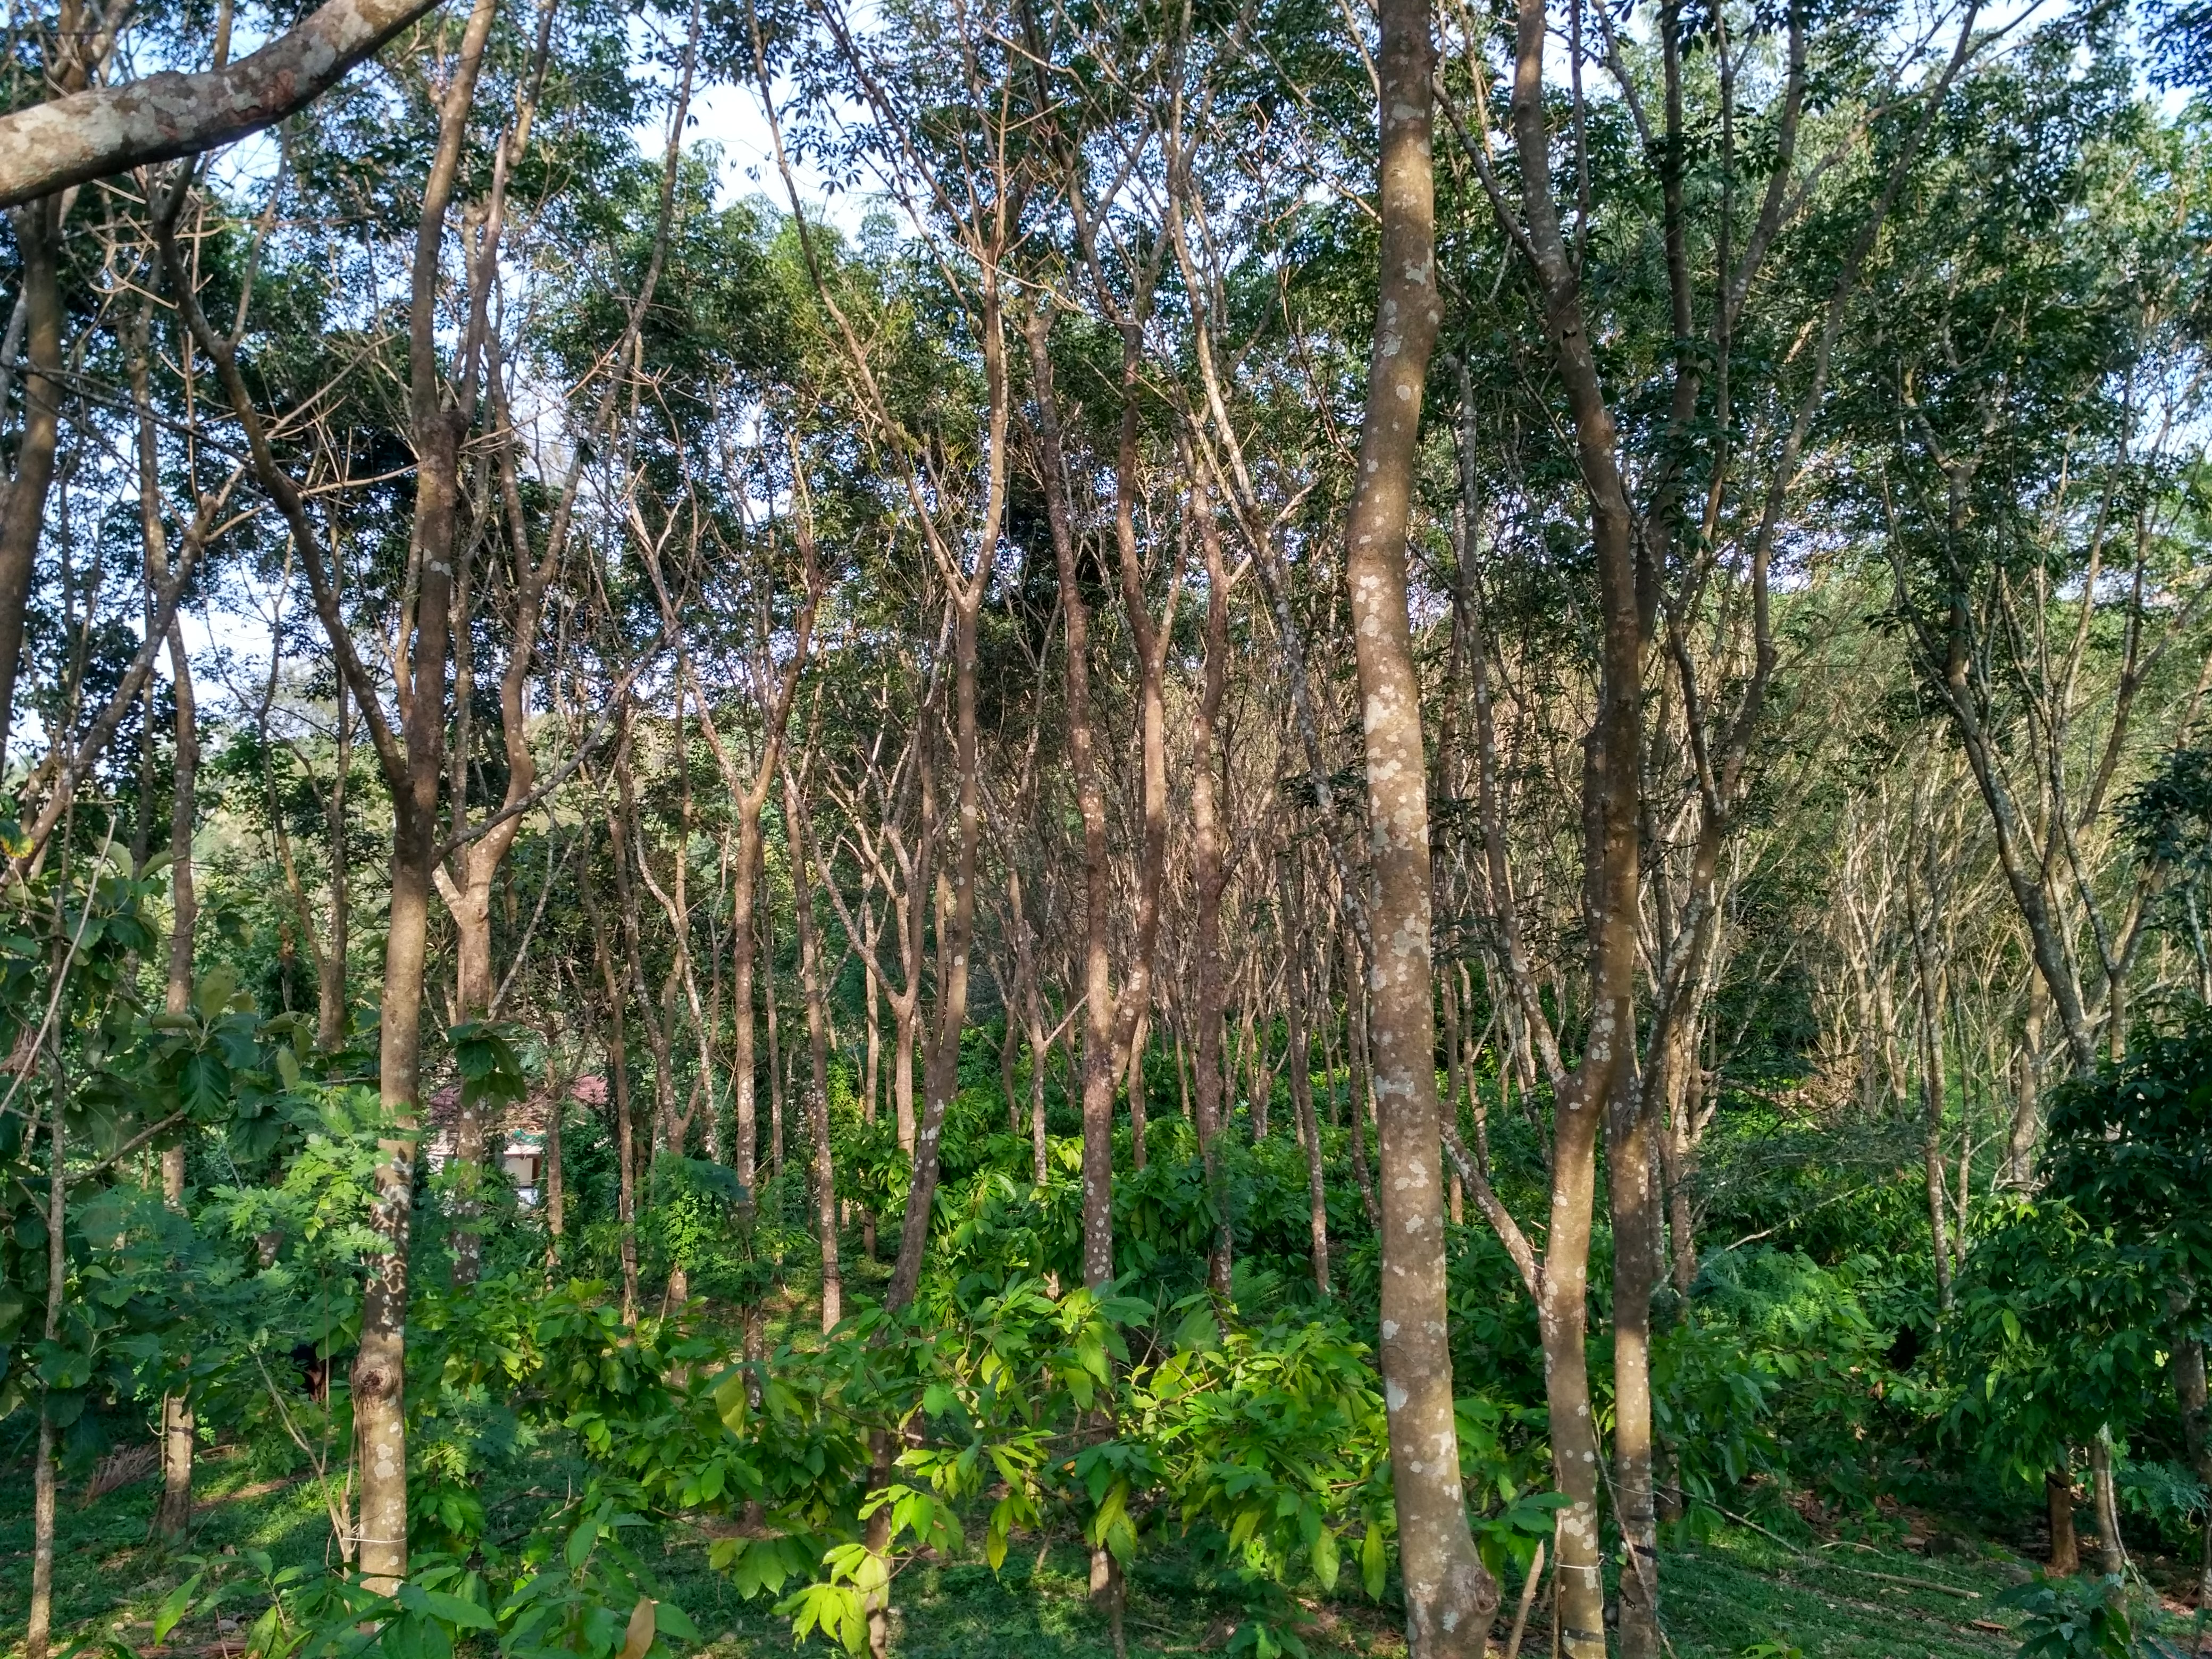 Multi layer farming technology in rubber plantations